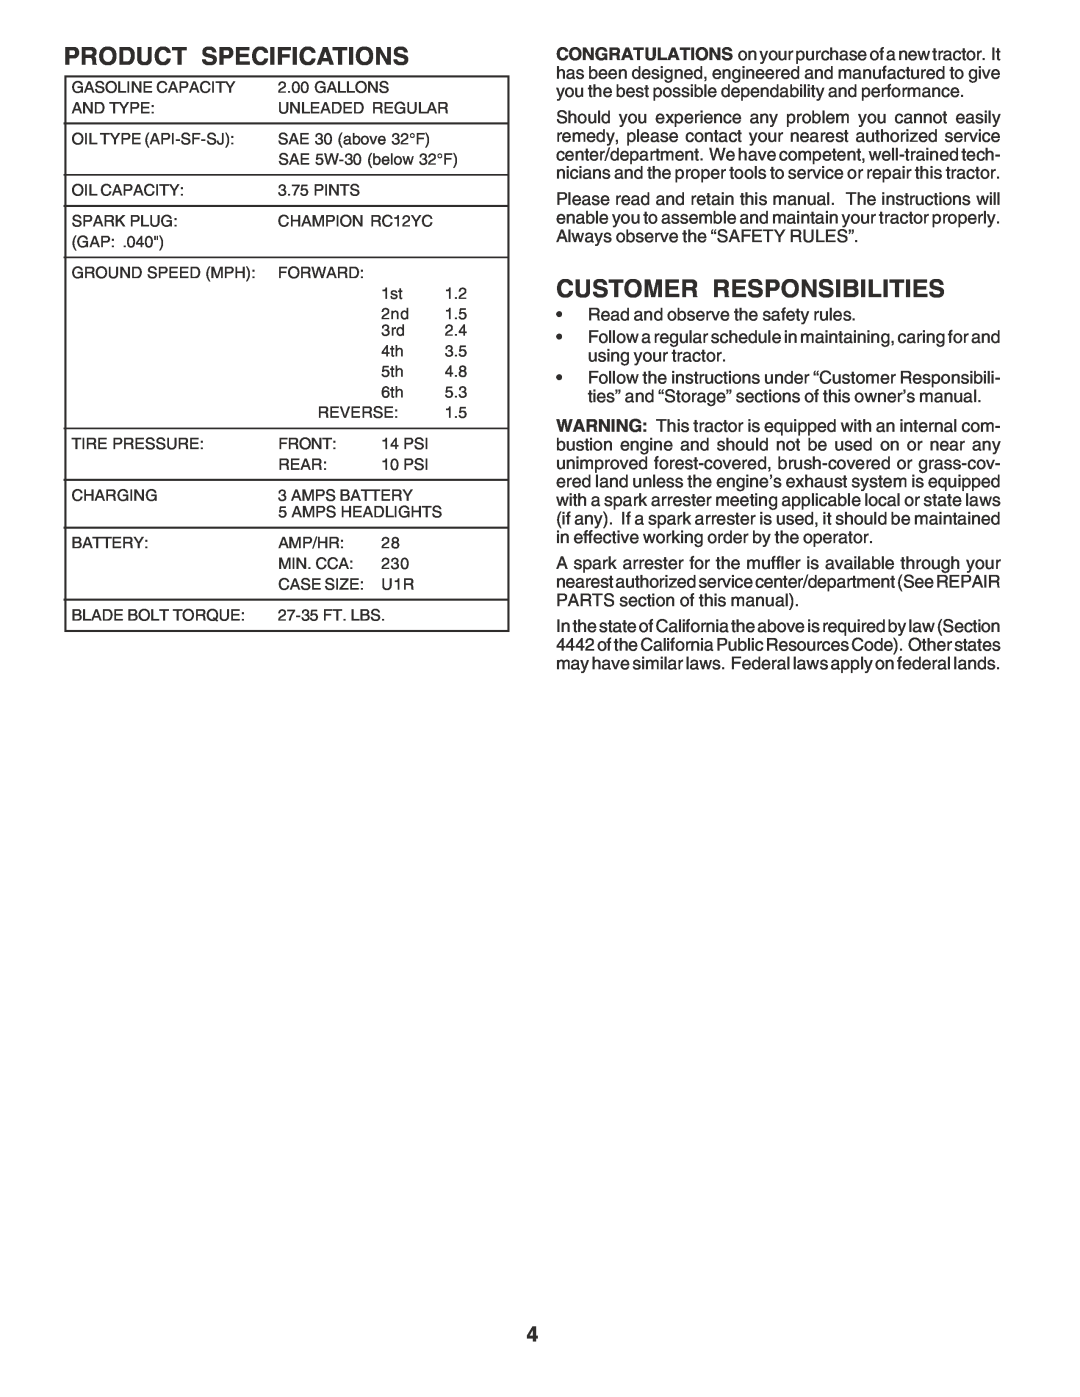 Poulan PPR2042STB owner manual Product Specifications, Customer Responsibilities 